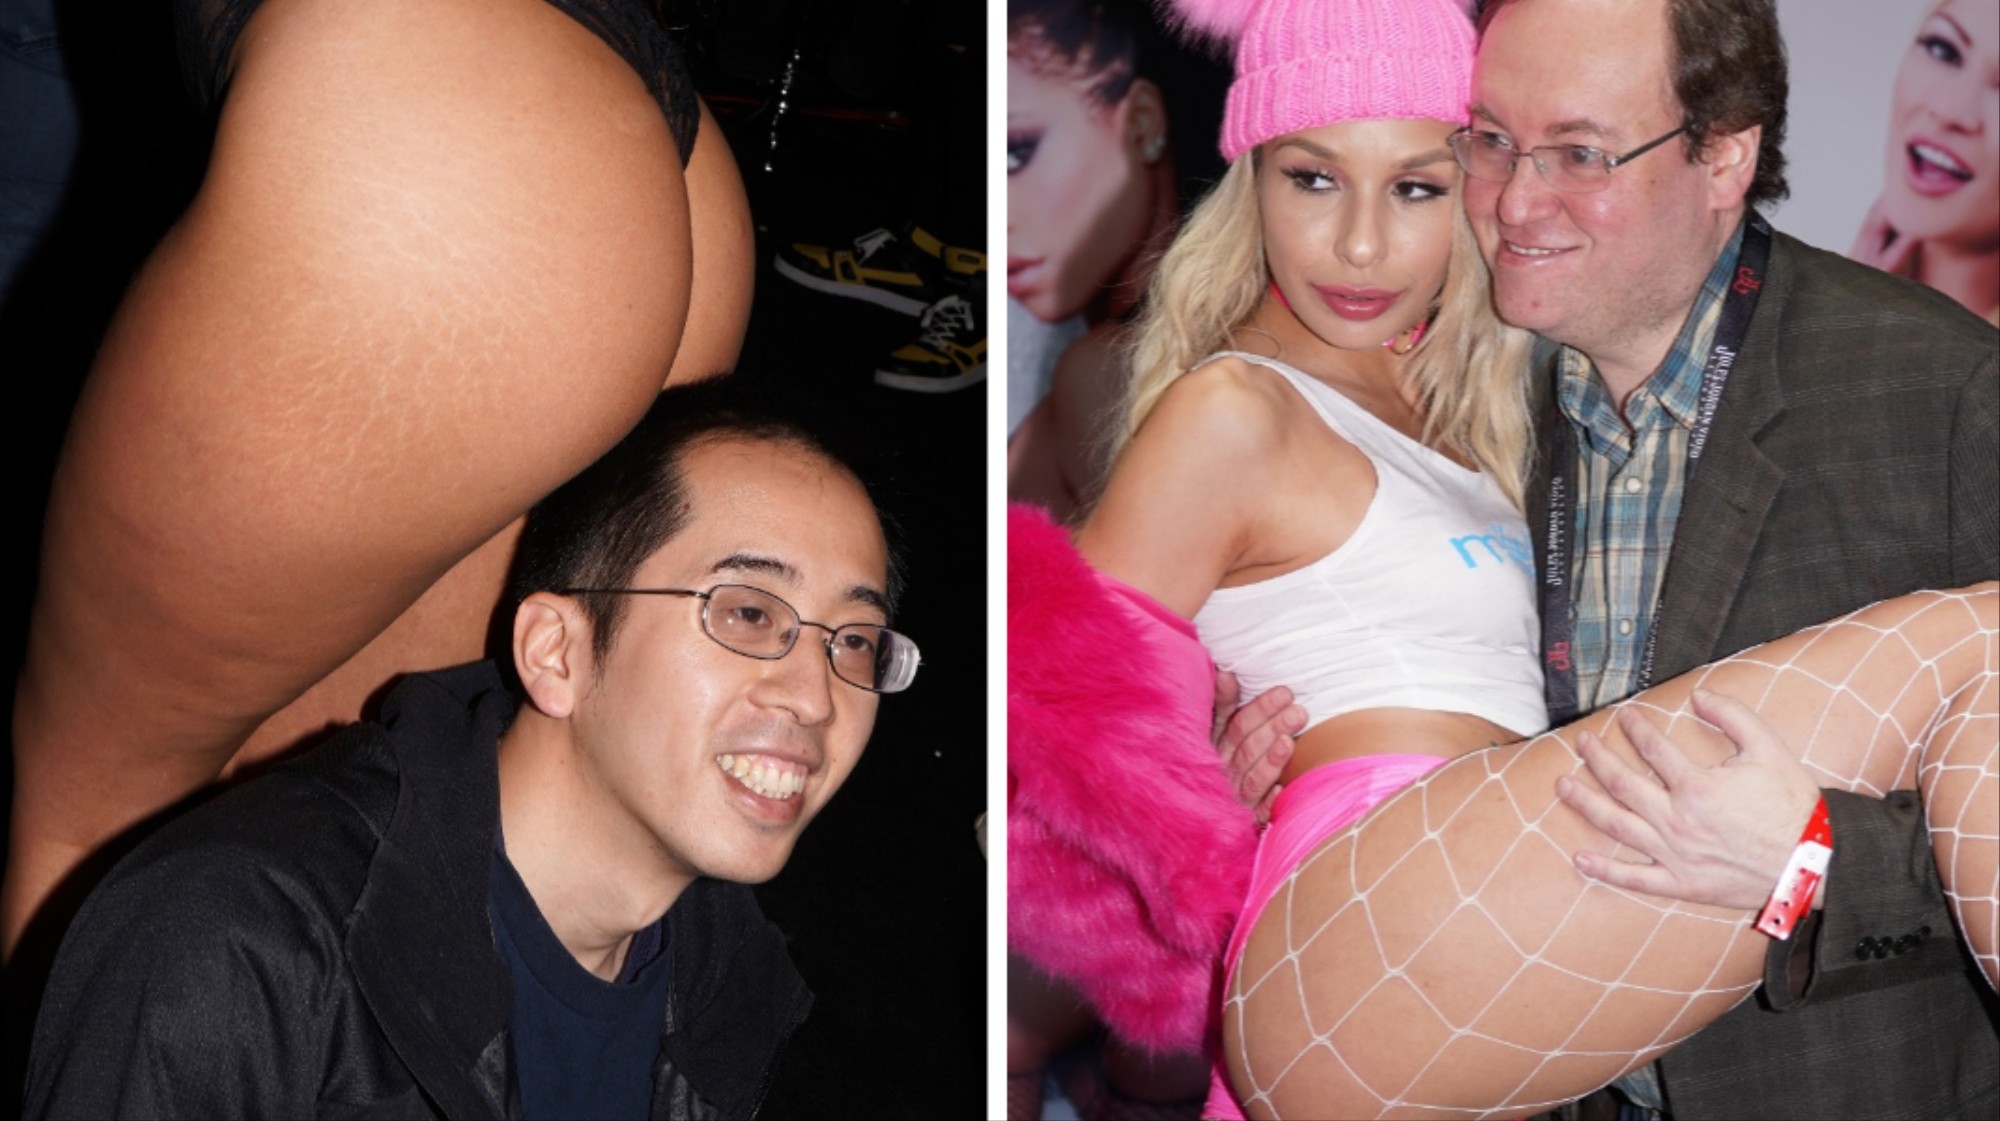 Biggest Porn - Photos of Porn Superfans at the World's Biggest Porn Event ...